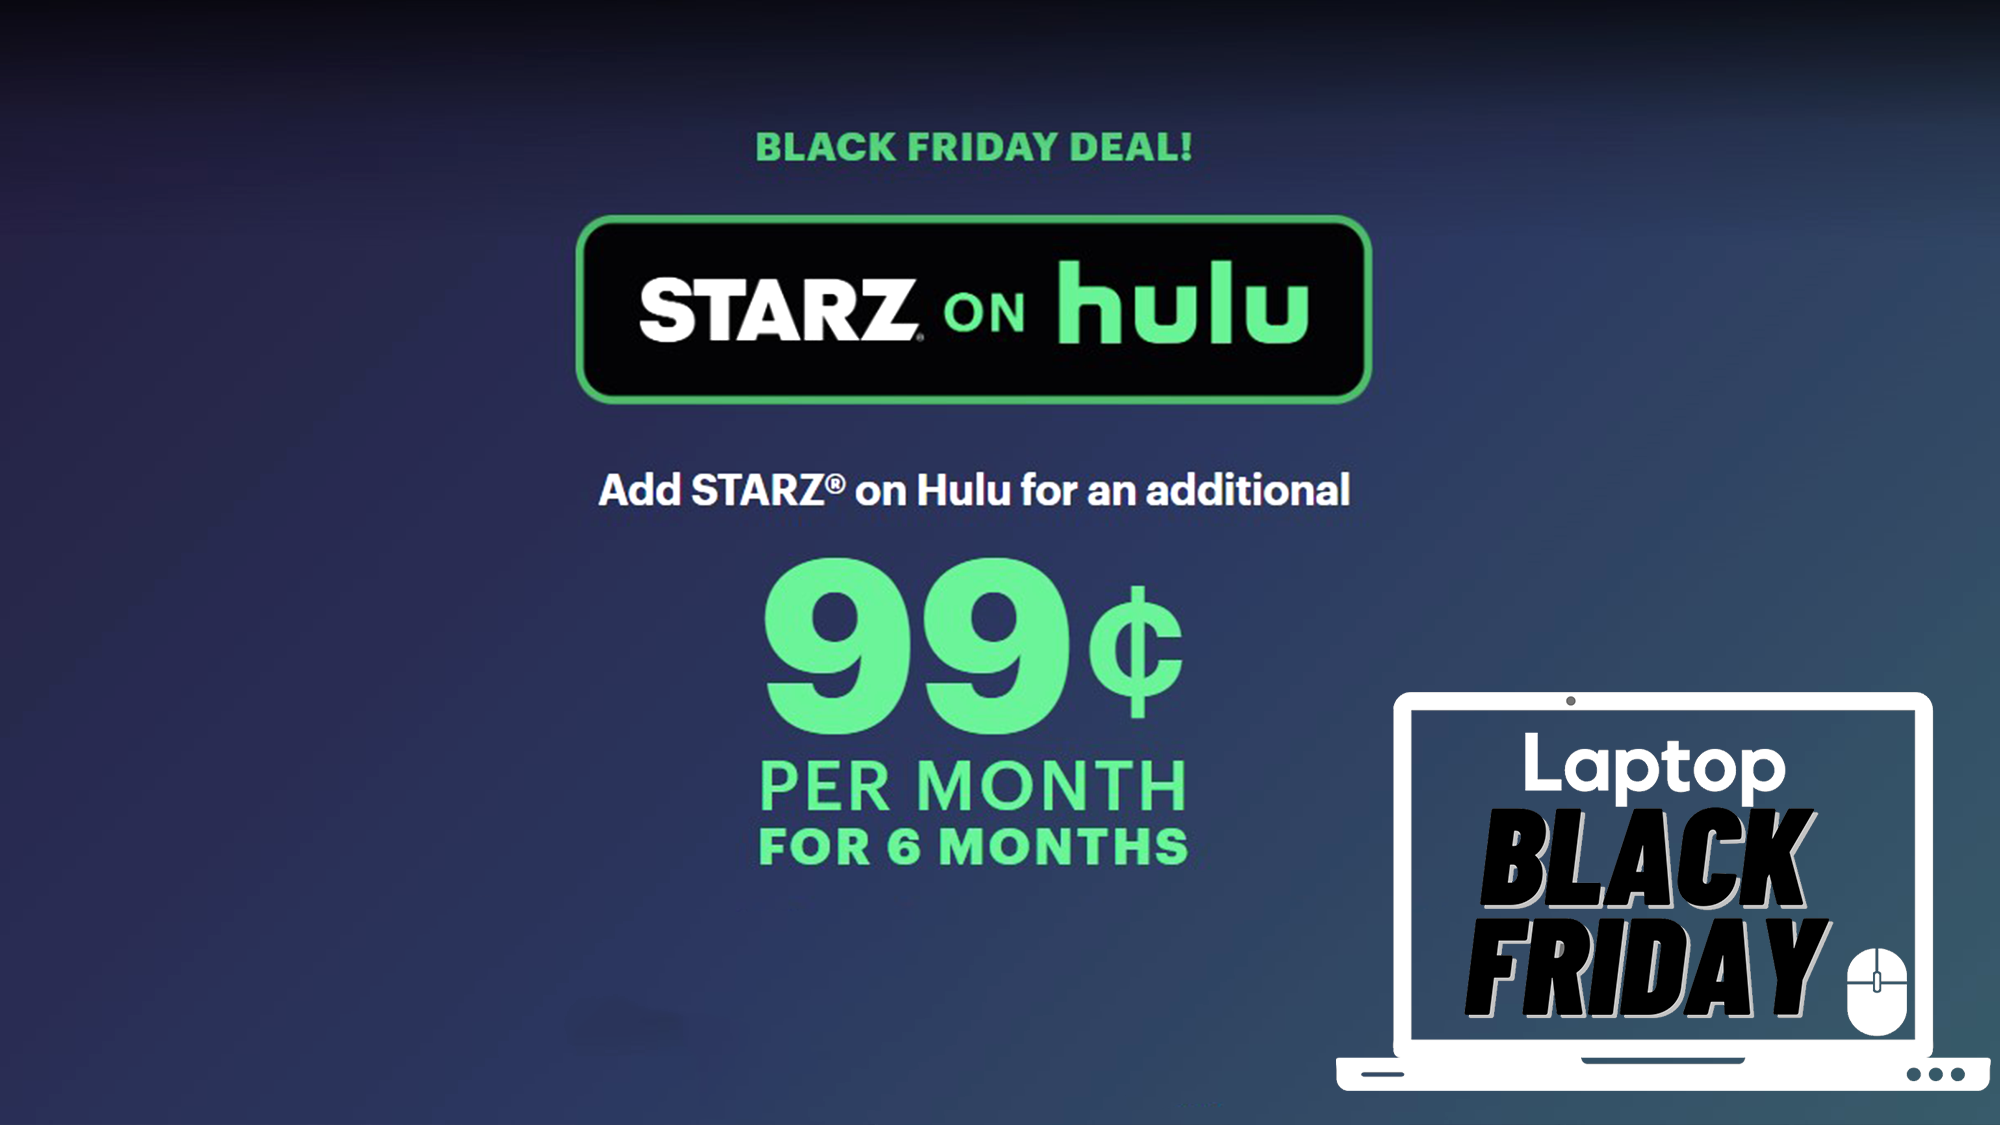 HBO - The One to Watch when you want it all. Save big for Black Friday.